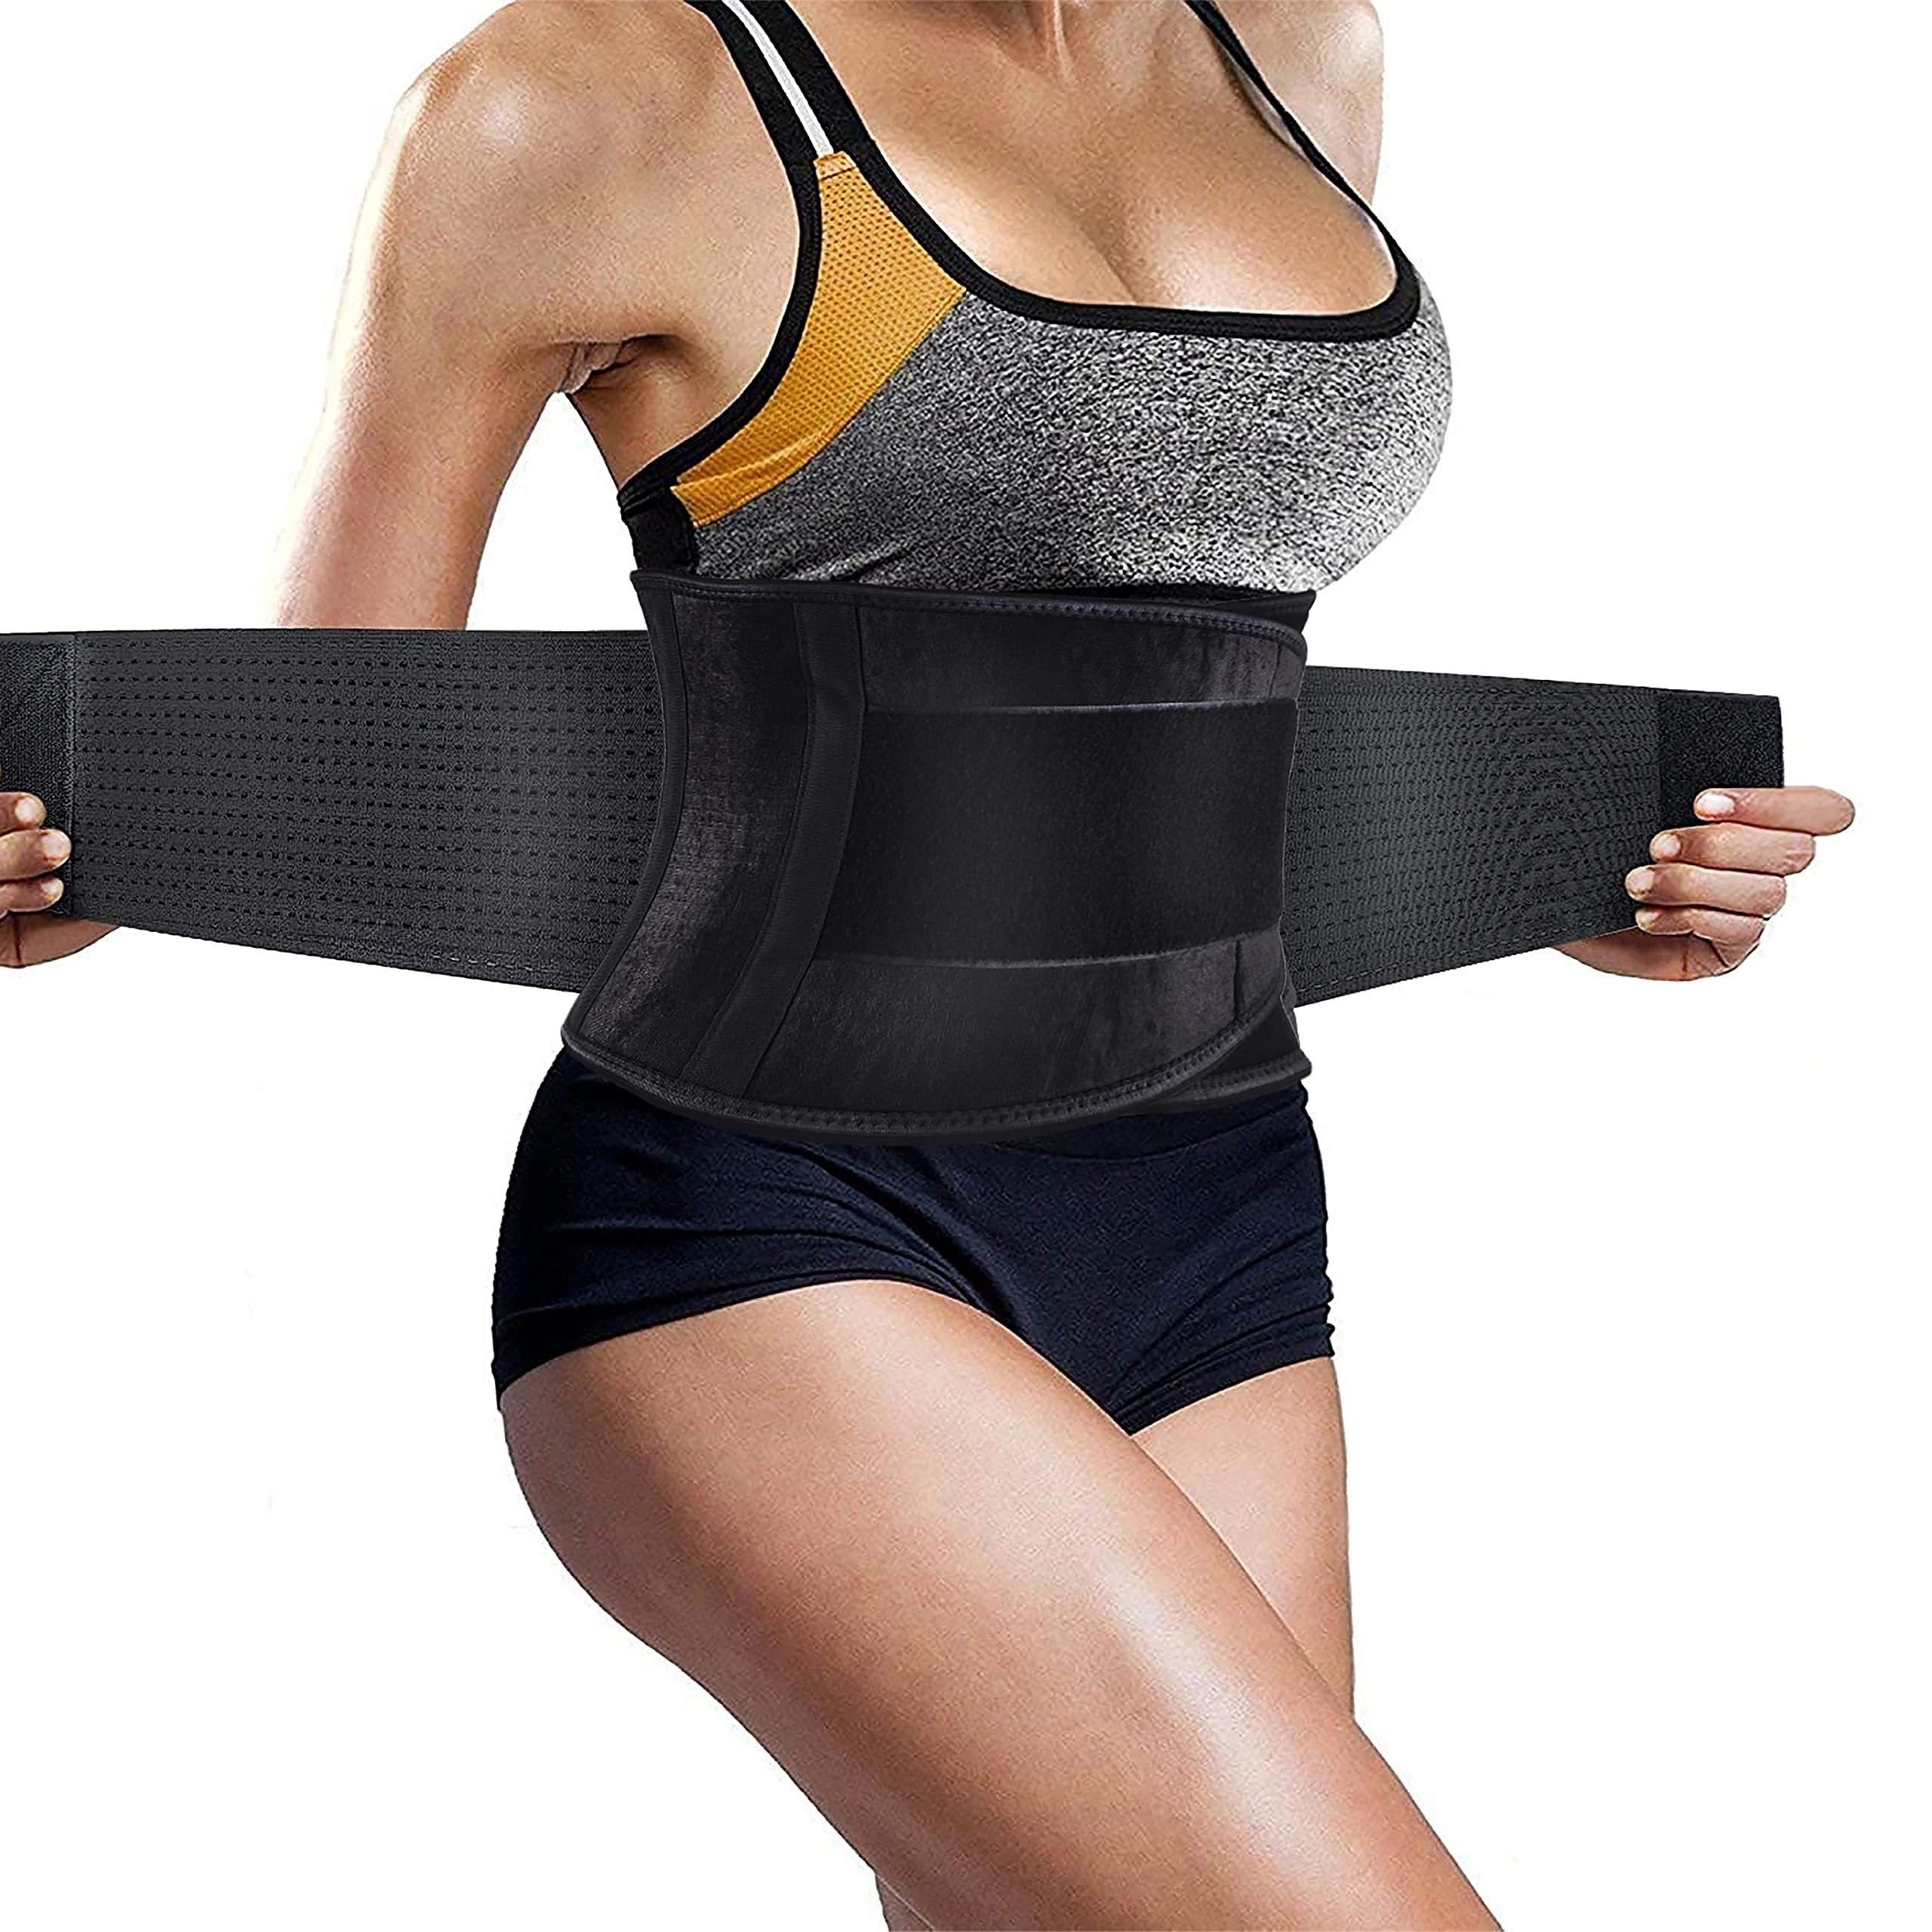 6m High-Quality Tummy Wrap Shaper Waist Trainer Belt 6metres by 12cm, Shop  Today. Get it Tomorrow!